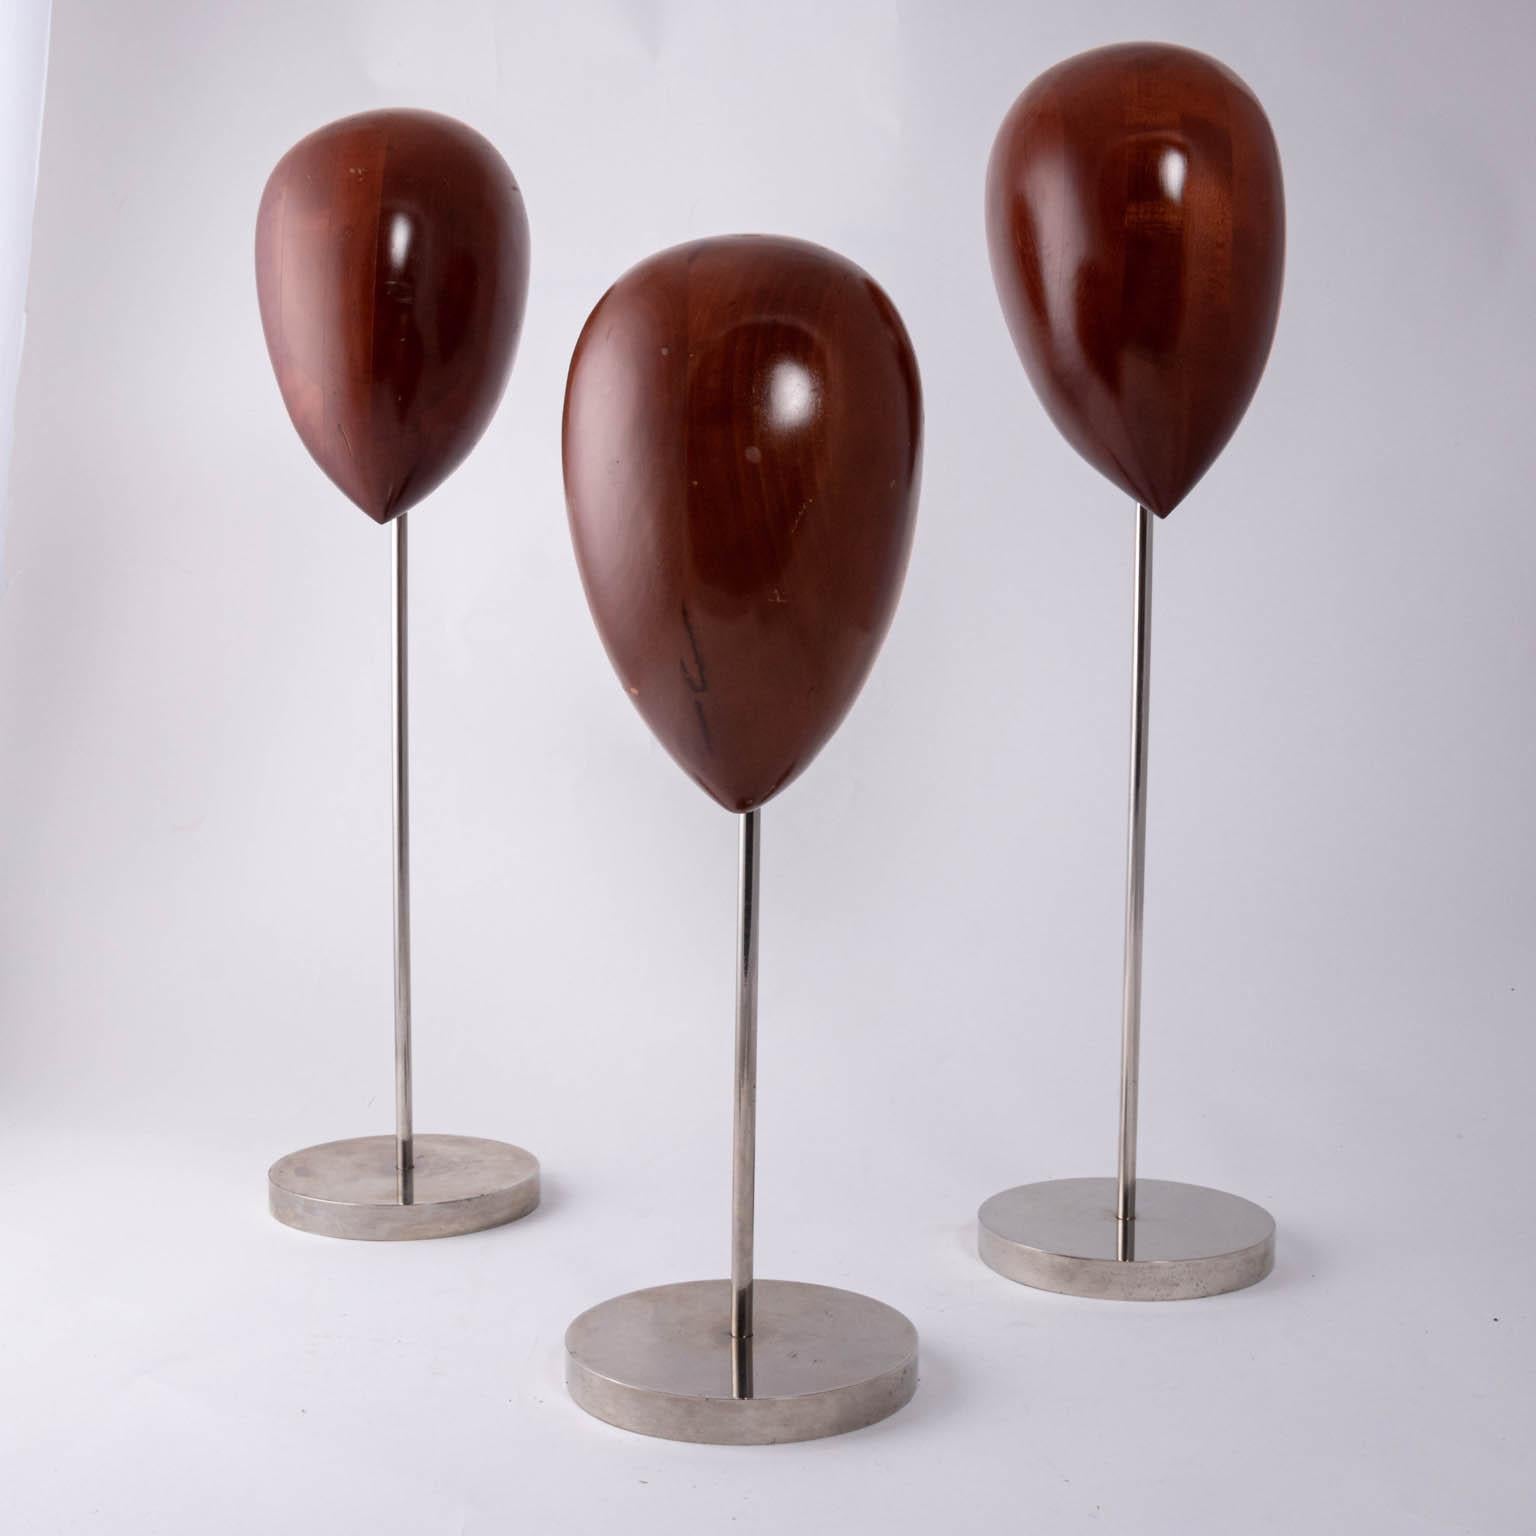 Set of three limited edition Ralph Lauren midcentury wooden heads on steel bases used as store props, circa 1980s. Please note of wear consistent with age including finish loss, wood loss, scratches, and chips due to daily use. Made in the United